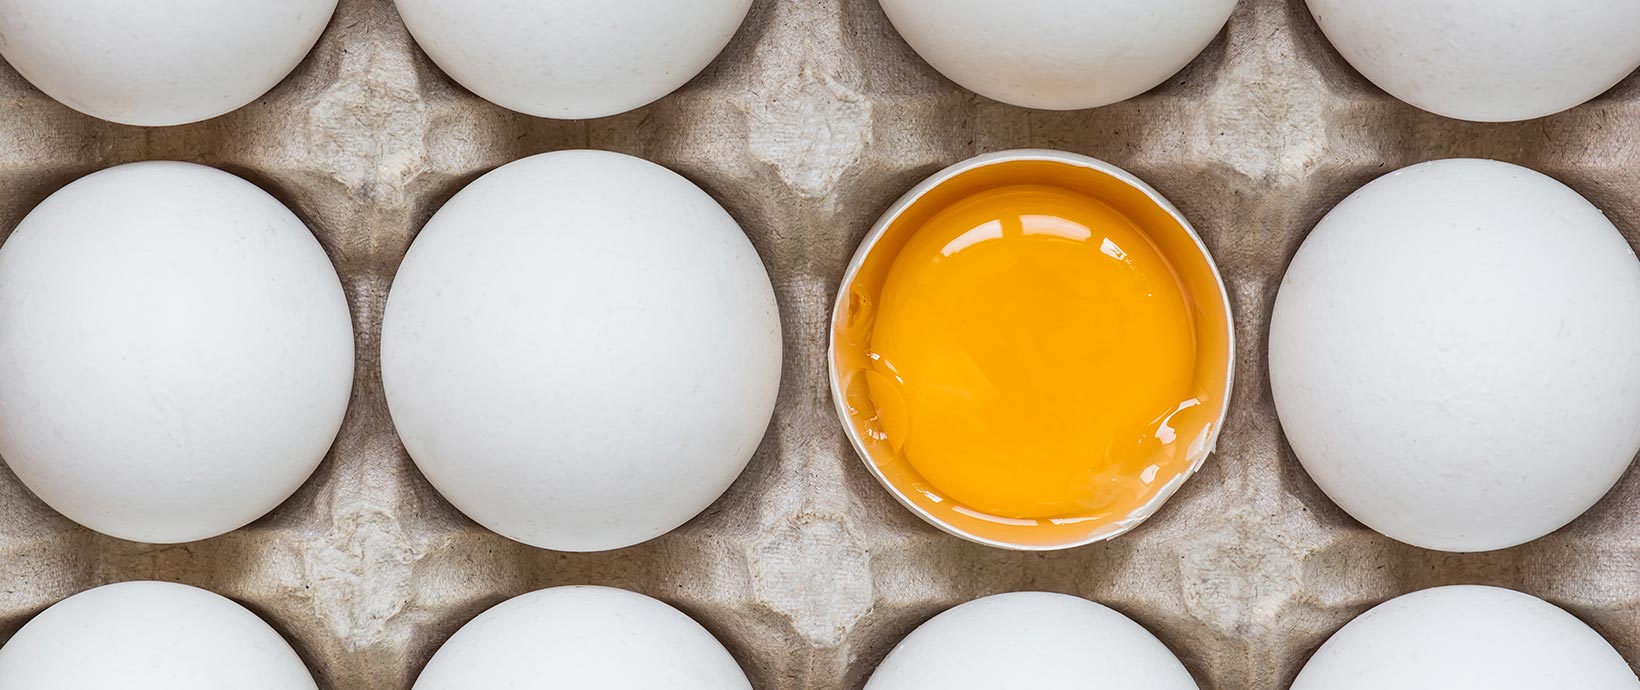 Digital Debunking: Can the Humble Egg Support the Weight of a Person?